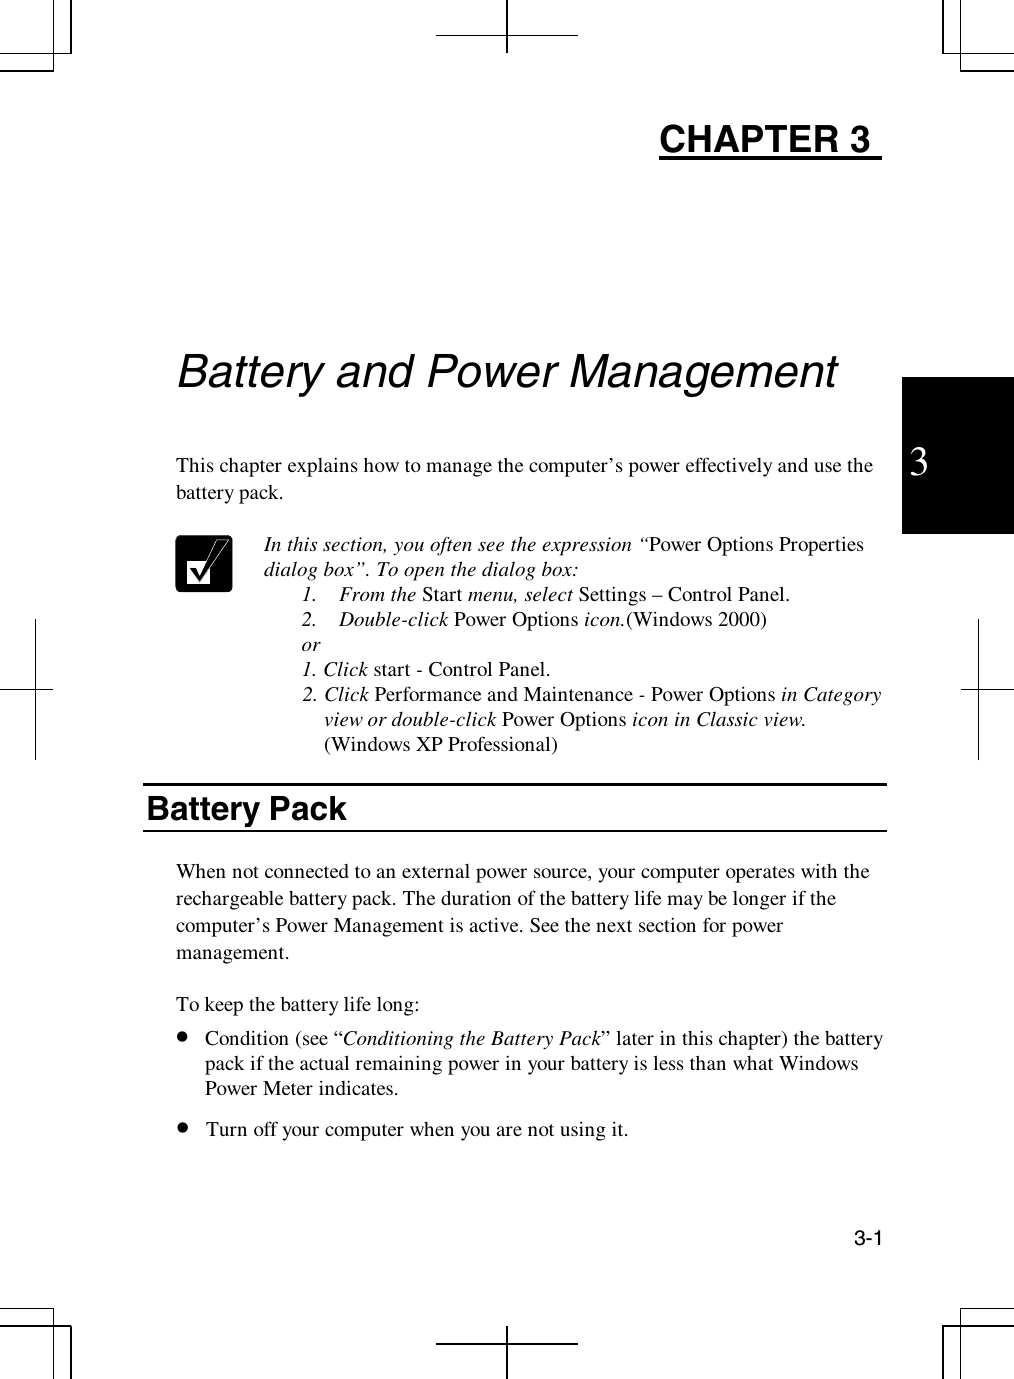 3-13CHAPTER 3Battery and Power ManagementThis chapter explains how to manage the computer’s power effectively and use thebattery pack.In this section, you often see the expression “Power Options Propertiesdialog box”. To open the dialog box:1. From the Start menu, select Settings – Control Panel.2. Double-click Power Options icon.(Windows 2000)or1. Click start -Control Panel.2. Click Performance and Maintenance -Power Options in Categoryview or double-click Power Options icon in Classic view.(Windows XP Professional)Battery PackWhen not connected to an external power source, your computer operates with therechargeable battery pack. The duration of the battery life may be longer if thecomputer’s Power Management is active. See the next section for powermanagement.To keep the battery life long:•  Condition (see “Conditioning the Battery Pack” later in this chapter) the batterypack if the actual remaining power in your battery is less than what WindowsPower Meter indicates.•  Turn off your computer when you are not using it.